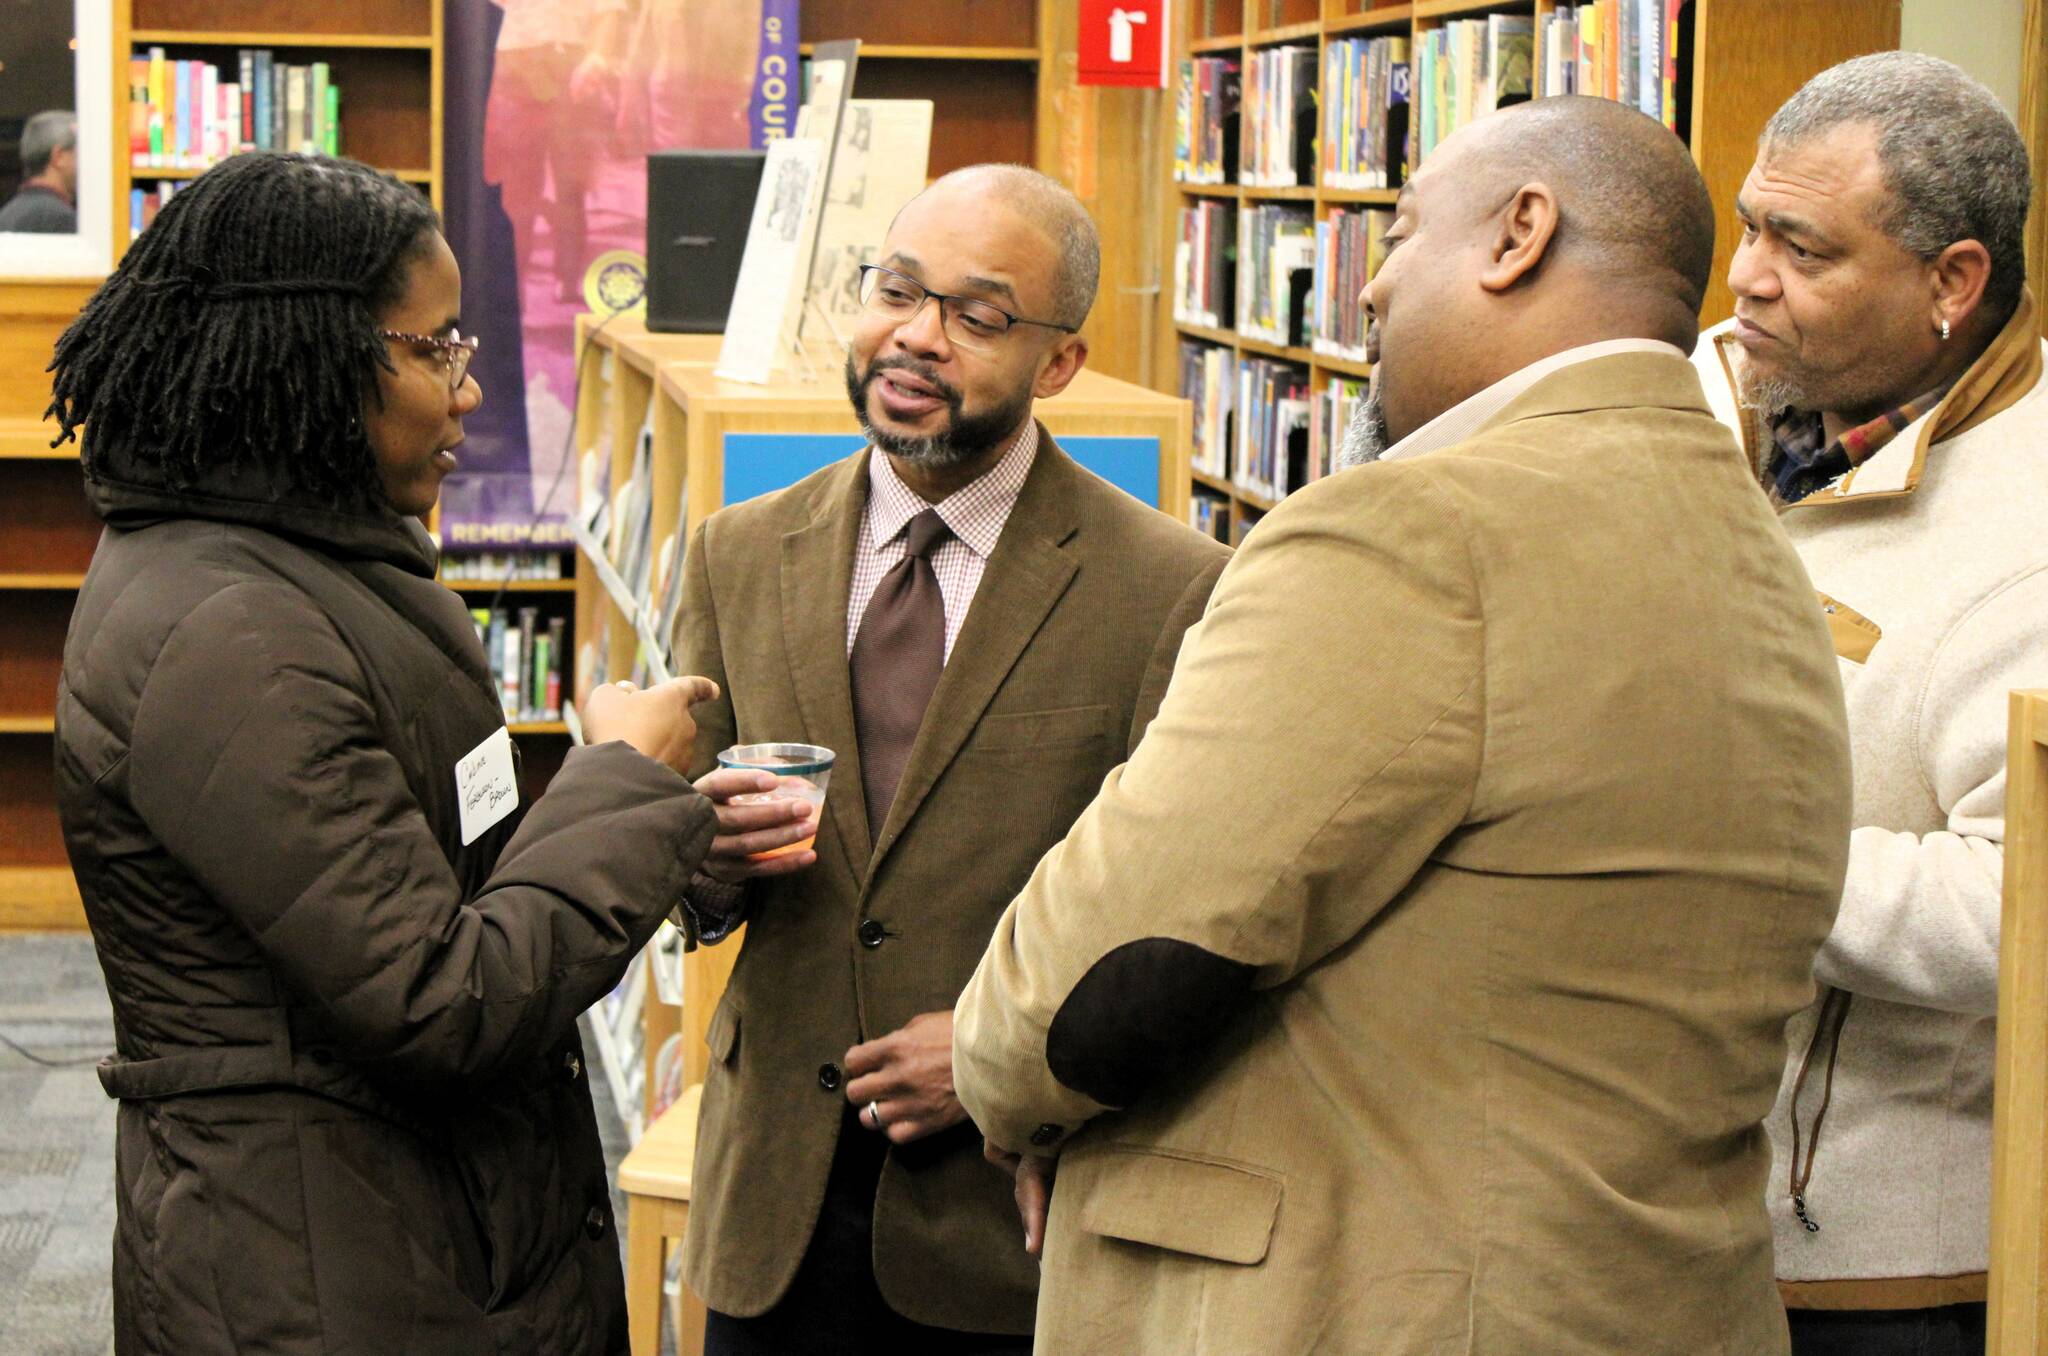 Elisha Meyer/Kitsap News Group Photos
KRL executive director Jason Driver (second from left) speaks with guests at the ceremony for the newly renamed Martin Luther King Jr. branch.